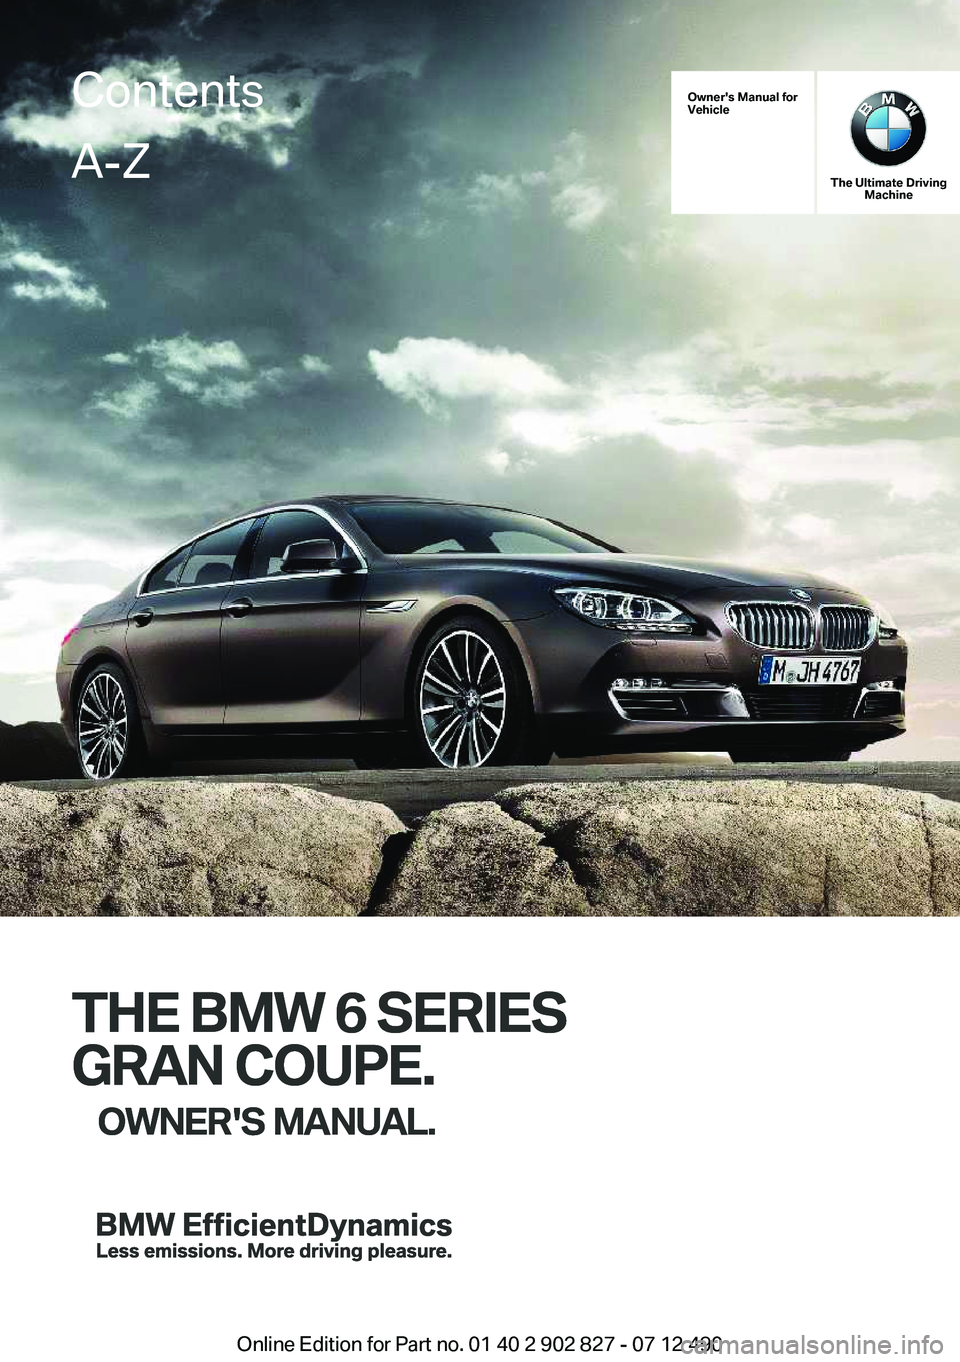 BMW 650I GRAN COUPE 2013  Owners Manual Owner's Manual for
Vehicle
THE BMW 6 SERIES
GRAN COUPE. OWNER'S MANUAL.
The Ultimate Driving Machine
THE BMW 6 SERIES
GRAN COUPE. OWNER'S MANUAL.
ContentsA-Z
Online Edition for Part no. 01